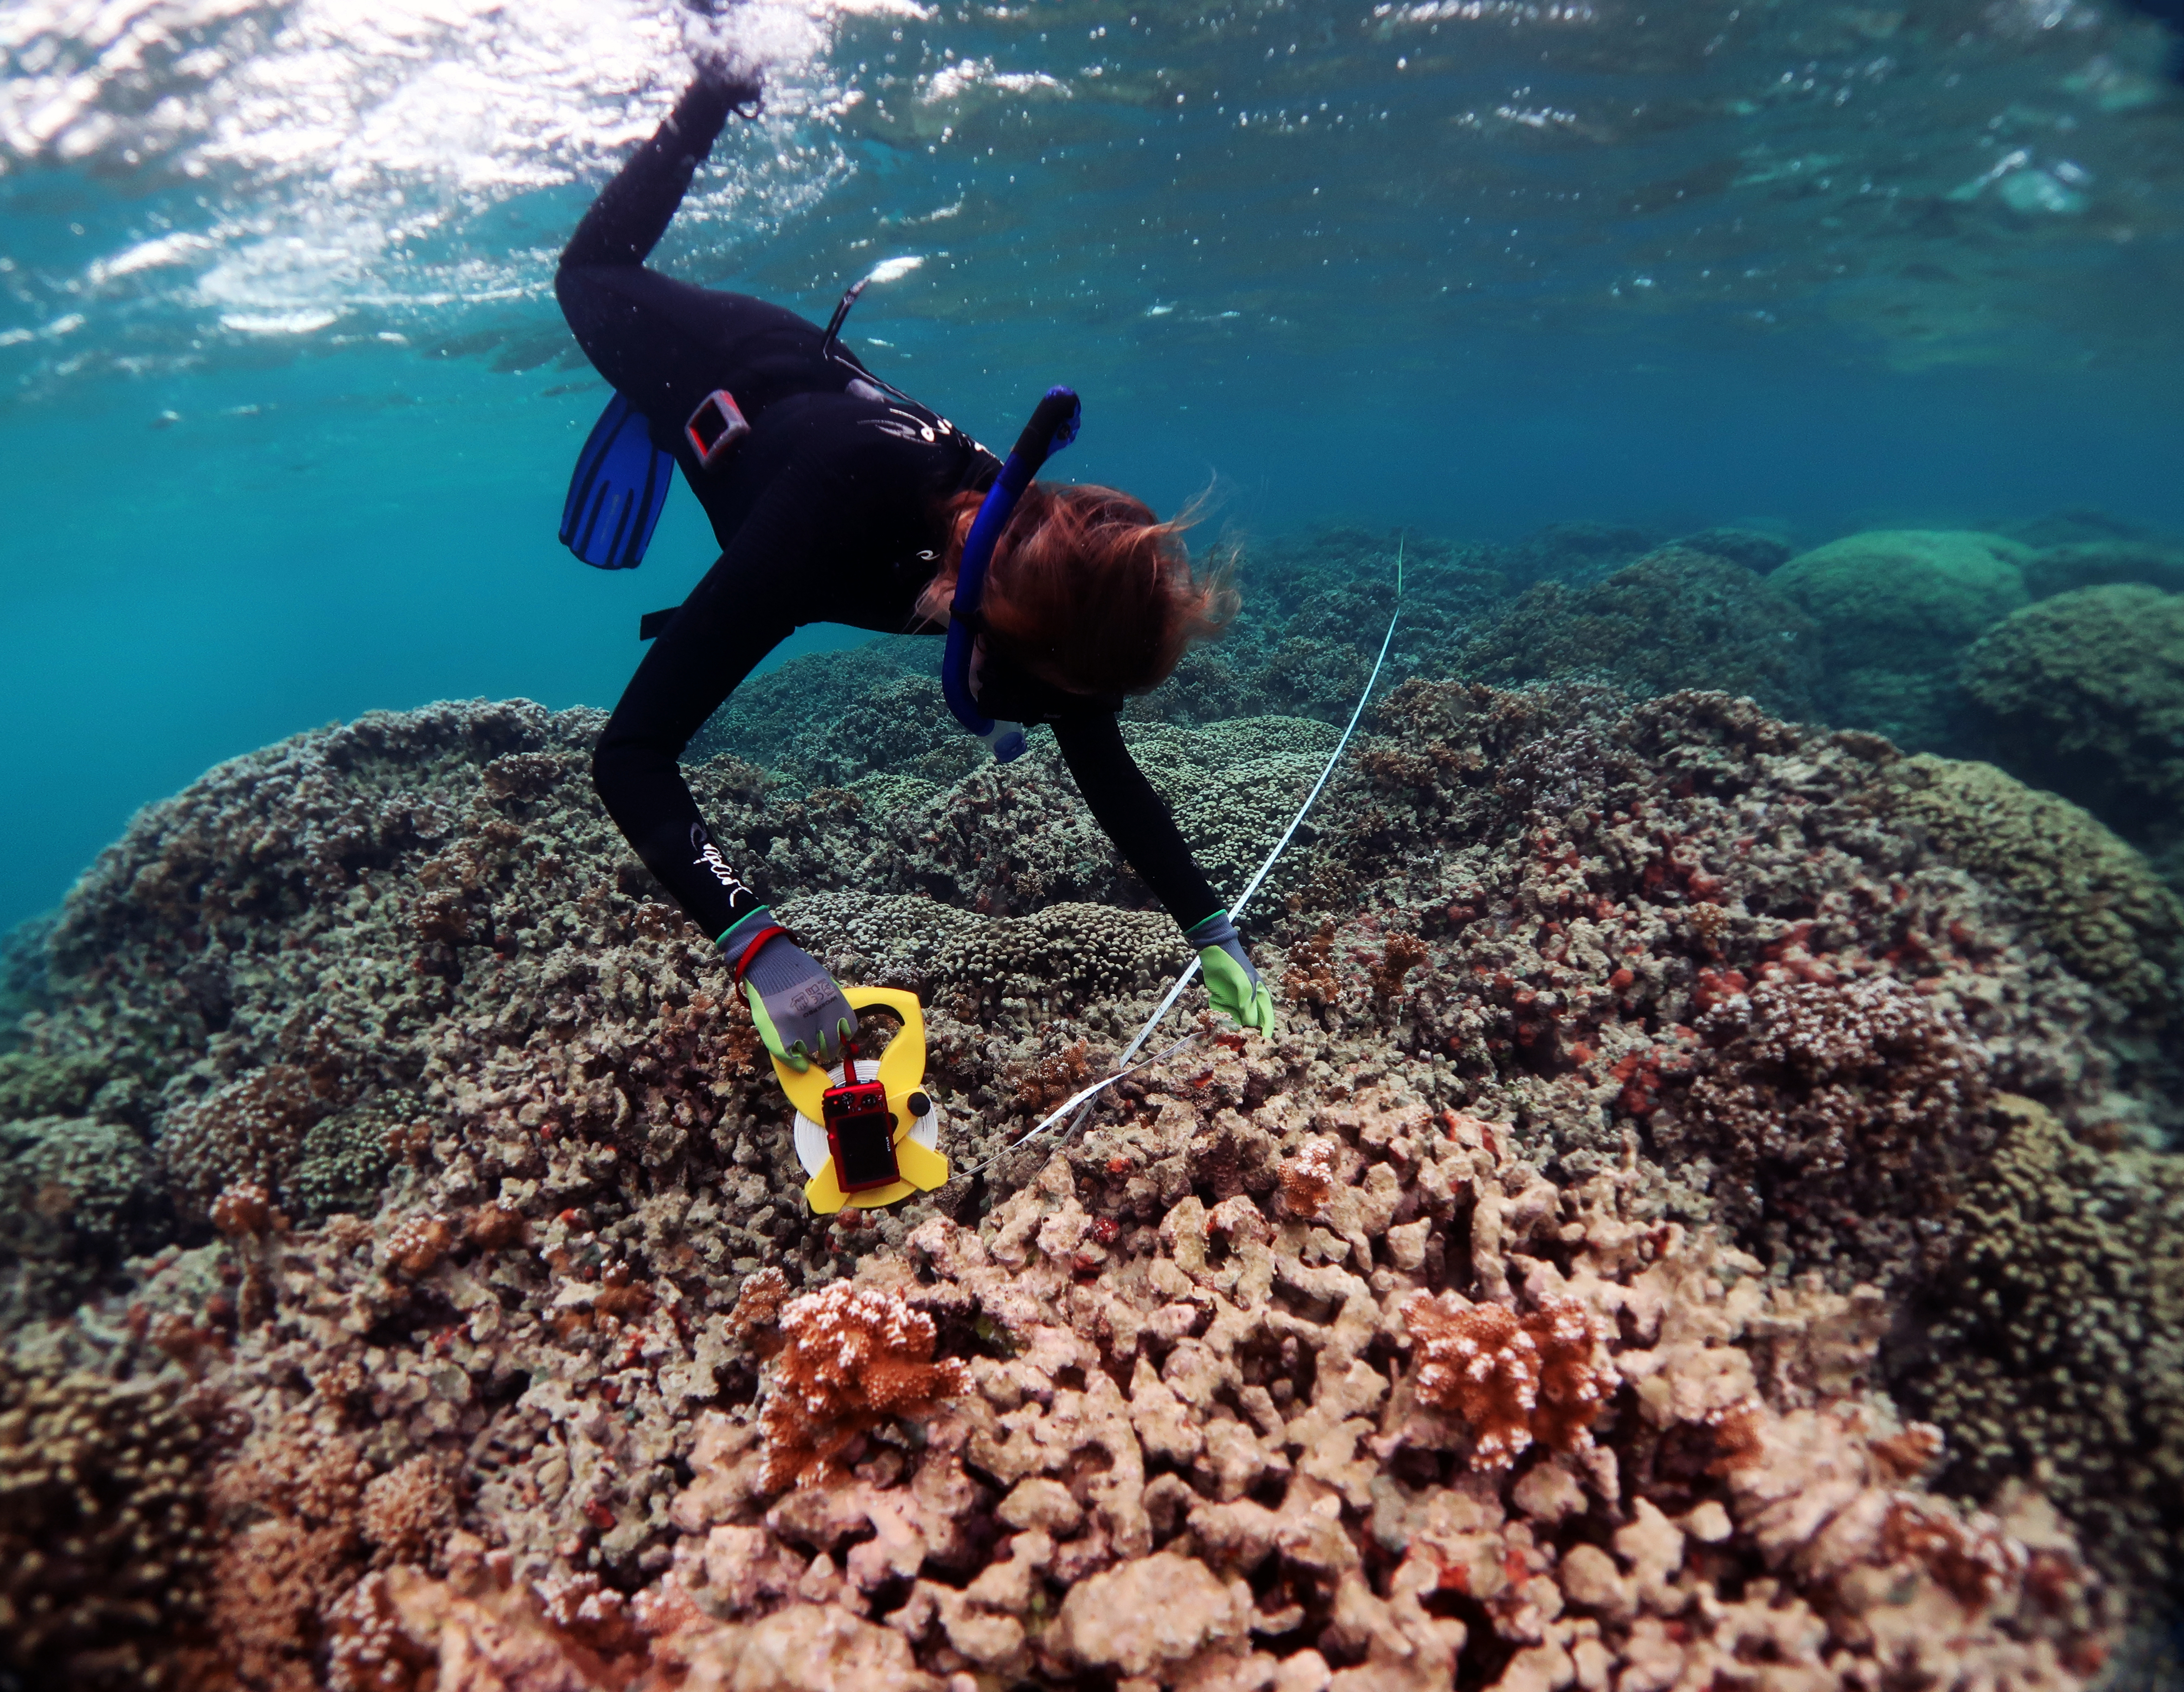  A diver in a wetsuit is using scientific equipment to take samples from a coral reef under clear water.